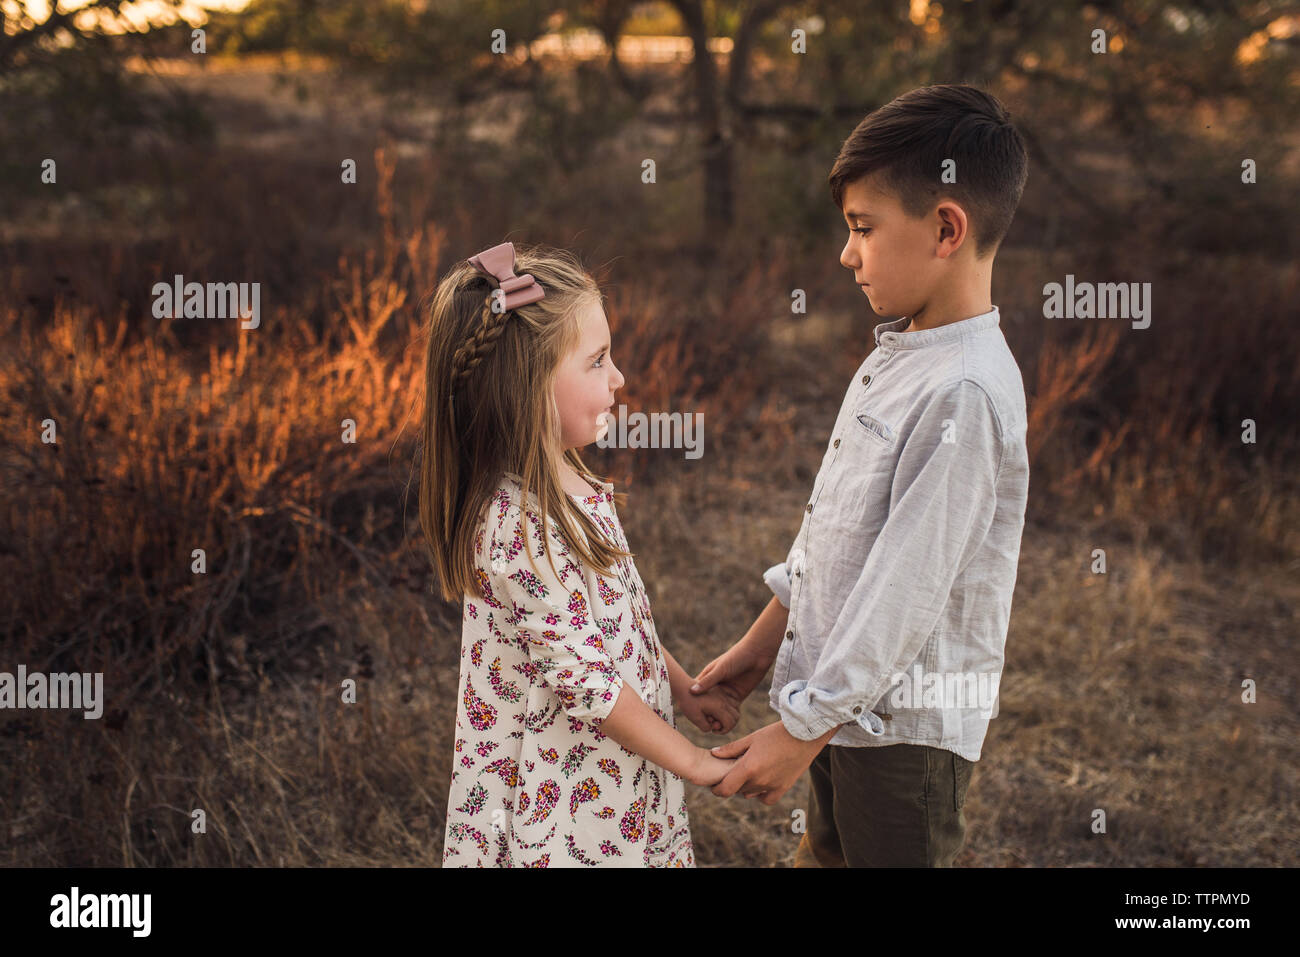 Young girl and boy looking at each other in California field at sunset Stock Photo